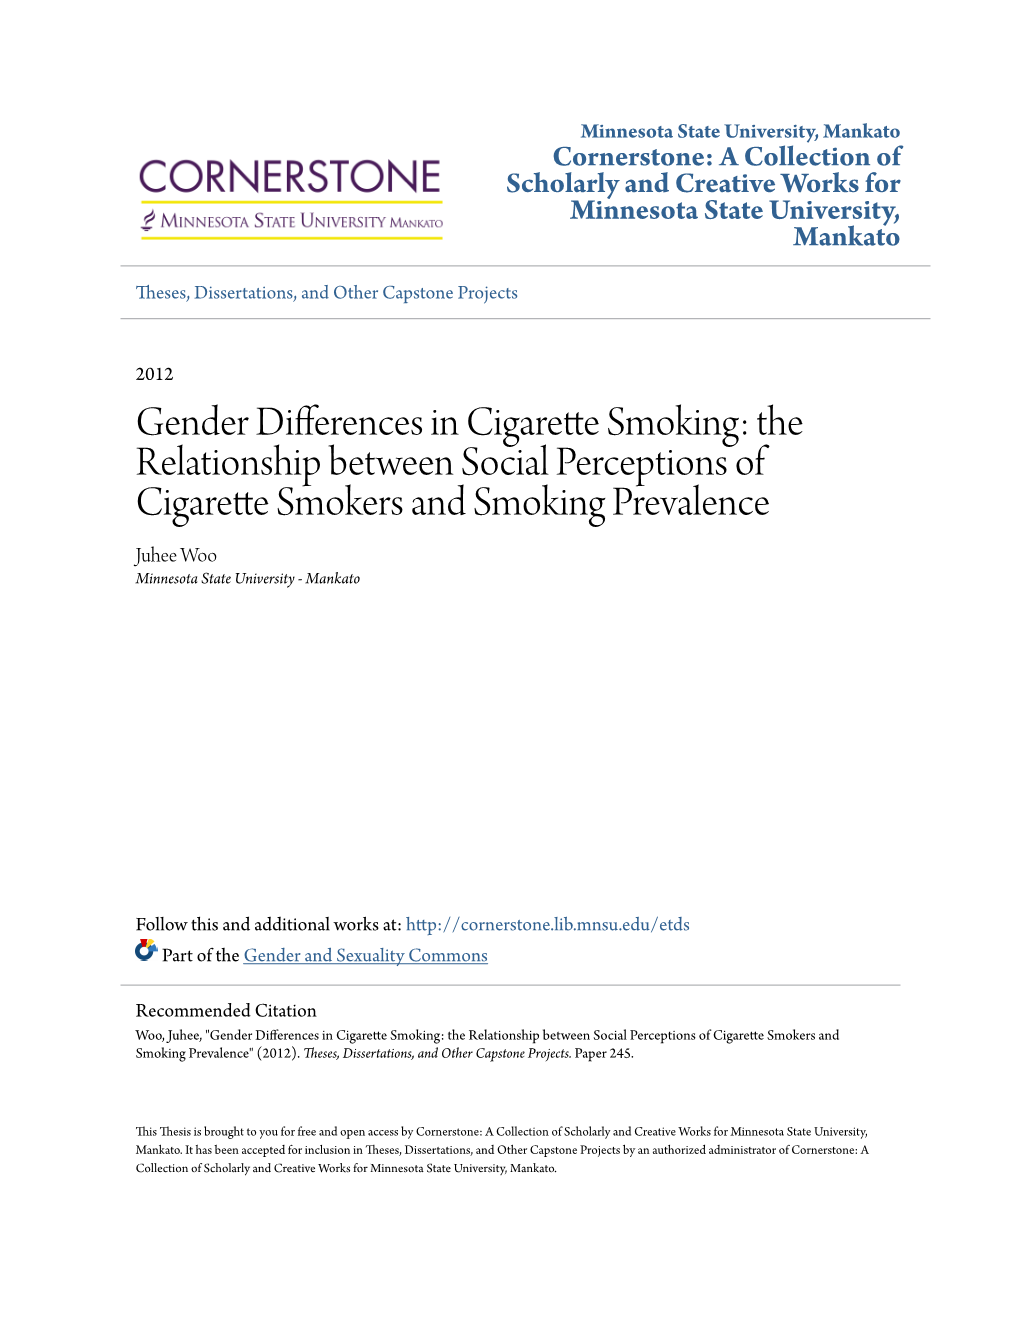 Gender Differences in Cigarette Smoking